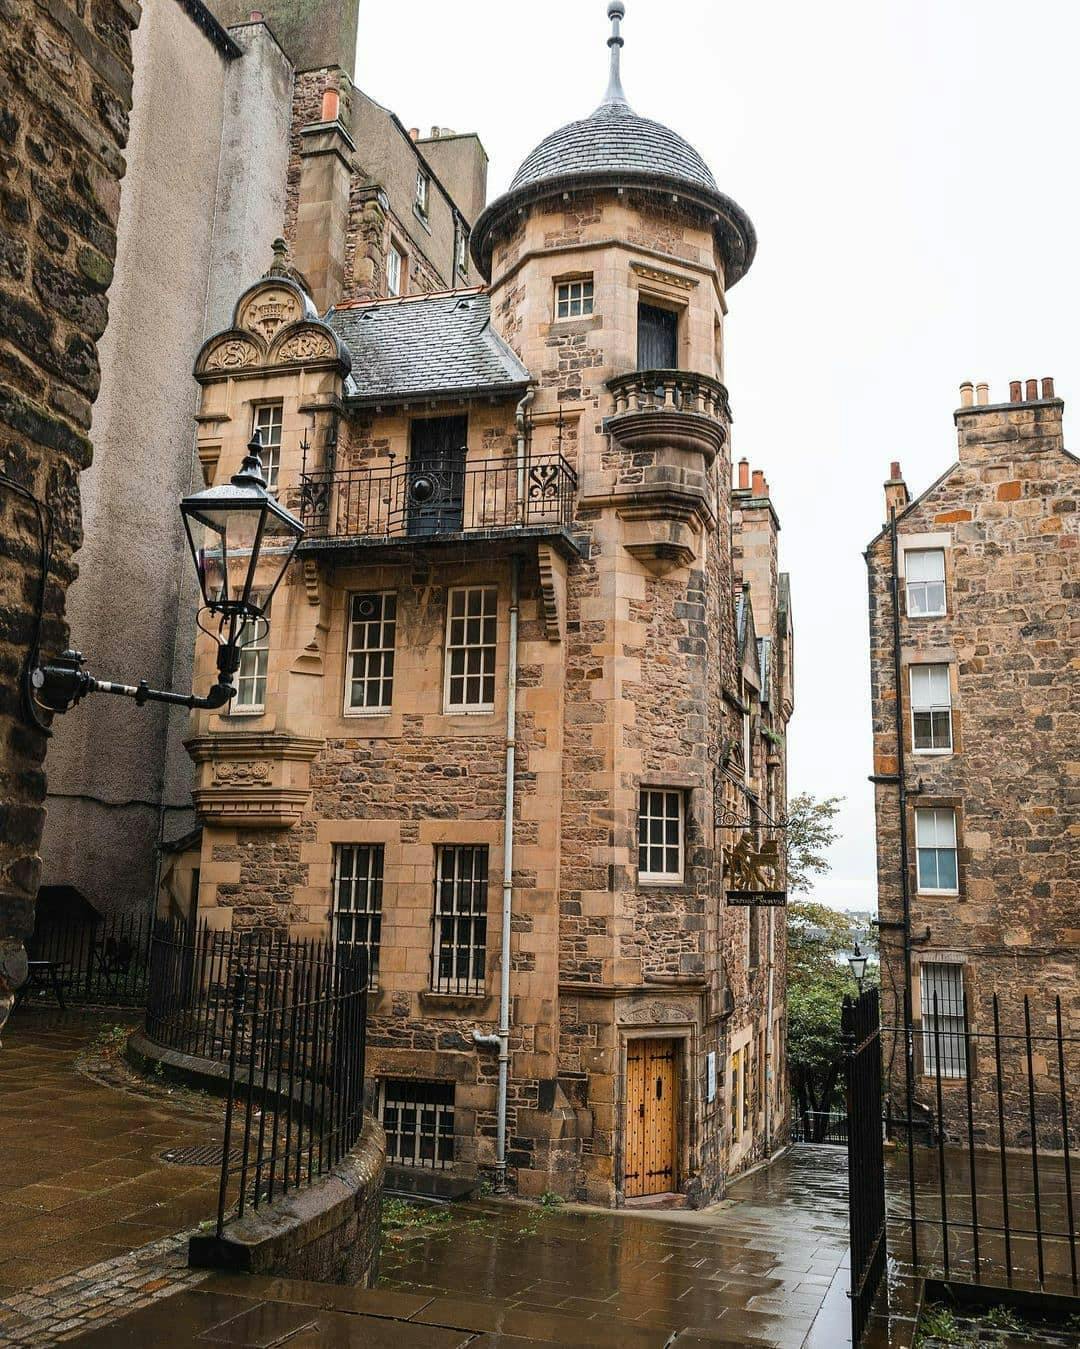 <p>The Writers’ Museum is a museum in Edinburgh that celebrates the lives and works of three of the most famous Scottish writers: Robert Burns, Walter Scott, and Robert Louis Stevenson. The museum is housed in Lady Stair’s House, a historic building dating back to 1622, located at the Lawnmarket on the Royal Mile. </p><p><br></p><p>The museum displays portraits, manuscripts, rare books, and personal objects of the writers, such as Burns’ writing desk, Scott’s chess set, and Stevenson’s riding boots. The museum also features a Makars’ Court, an outdoor space with inscriptions of quotes from Scottish writers on the paving stones. The museum is run by the City of Edinburgh Council and offers free entry.</p><p><br></p><p>The museum is open from 10:00 to 17:00 every day, except on some public holidays. The museum is a must-see for anyone interested in Scottish literature and culture. </p><p><br></p>